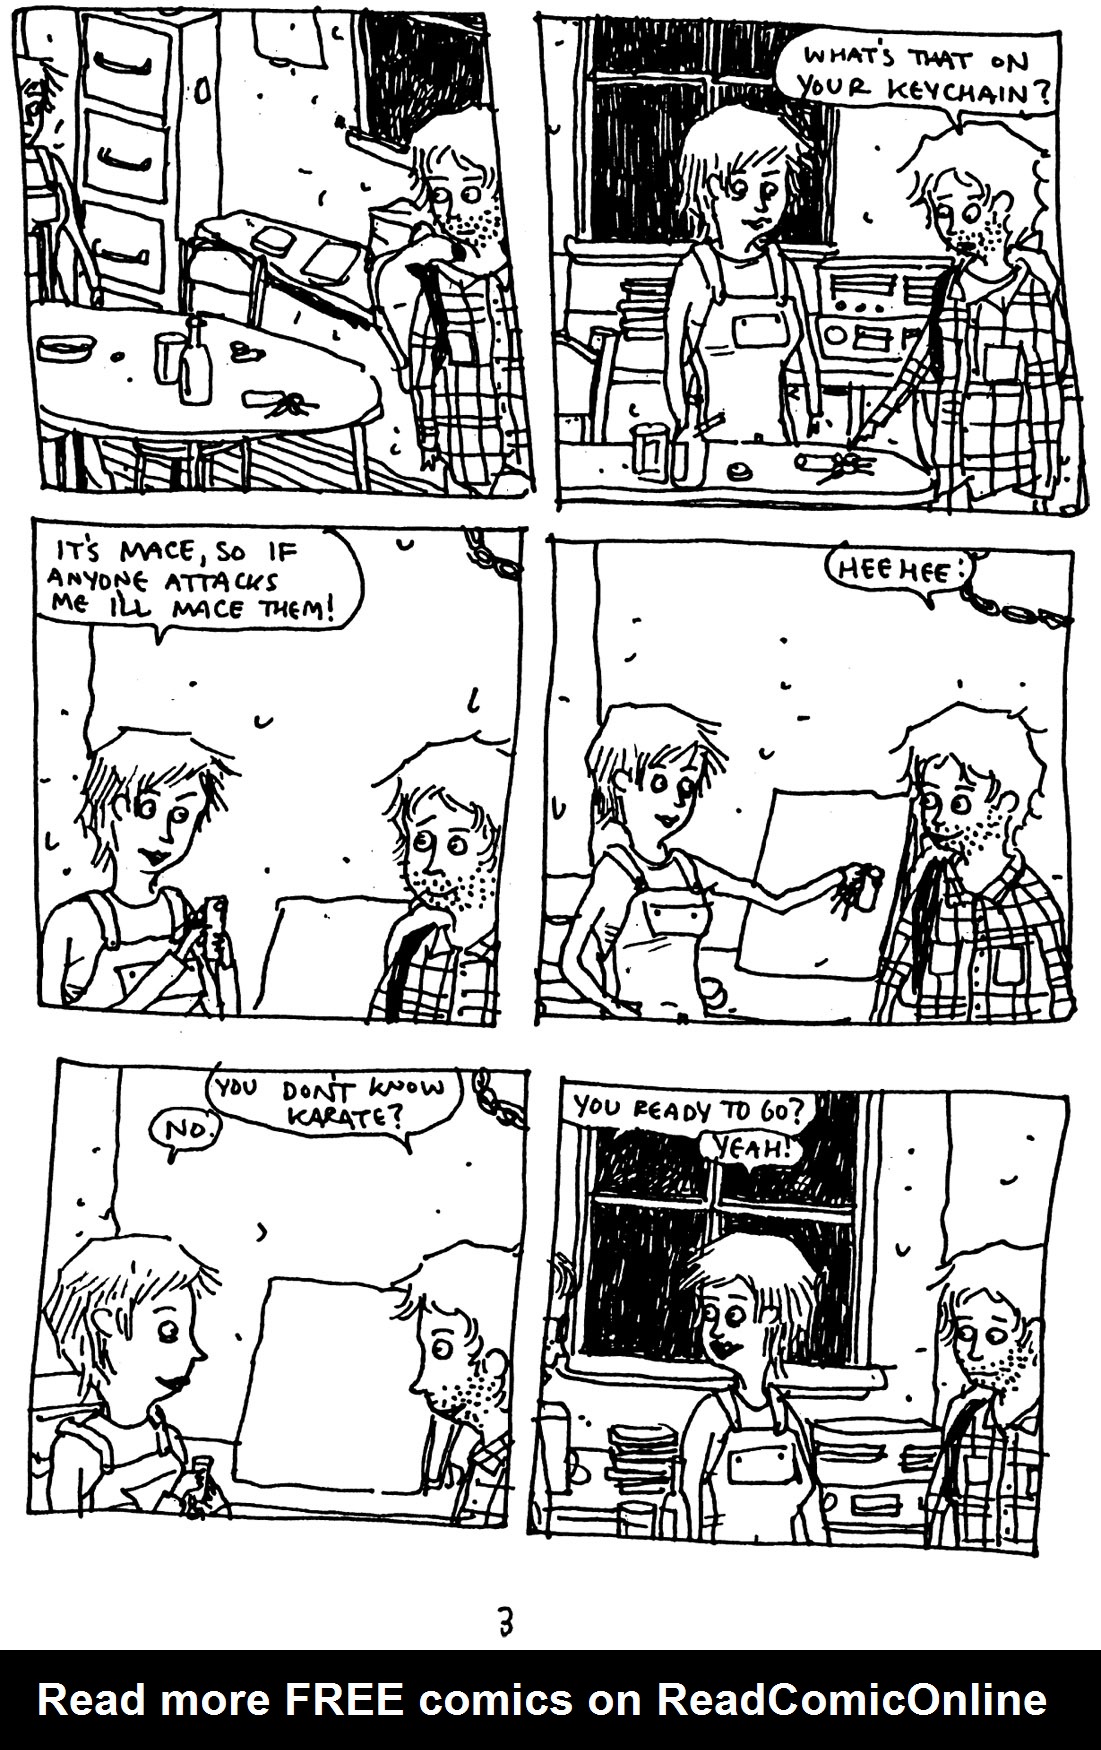 Read online Unlikely comic -  Issue # TPB (Part 1) - 12